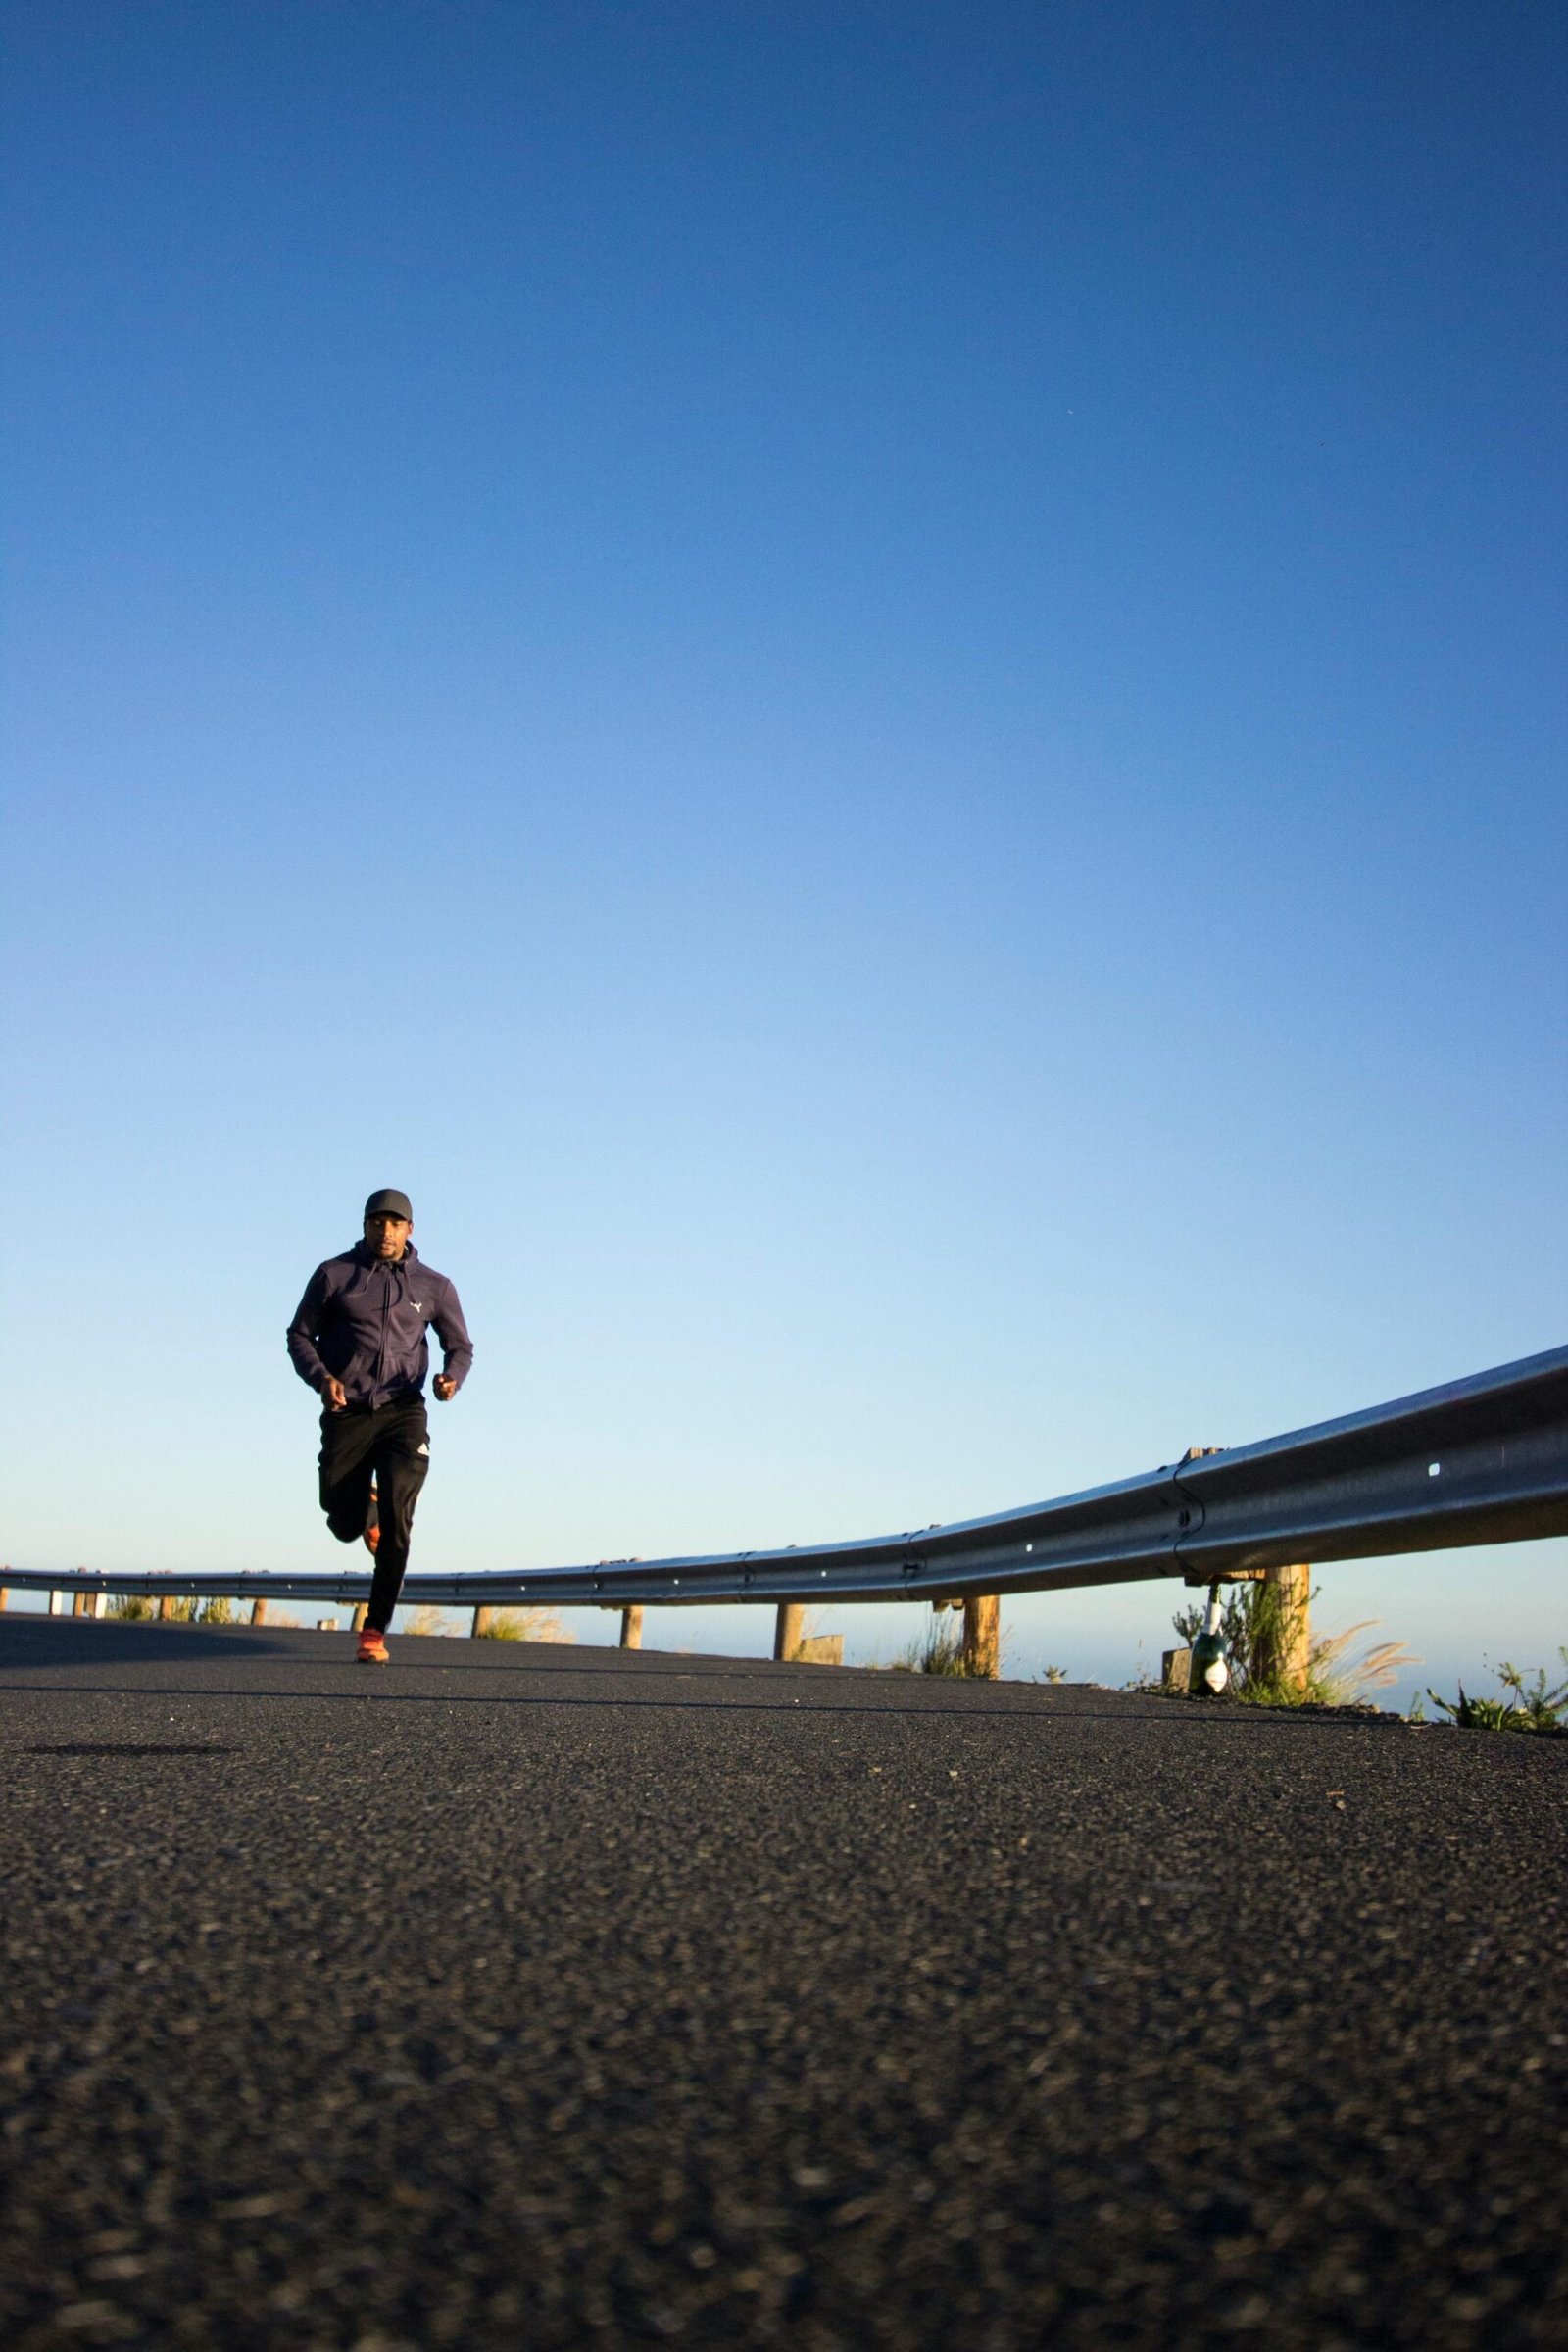 The Mental and Physical Aspects of Marathon Training